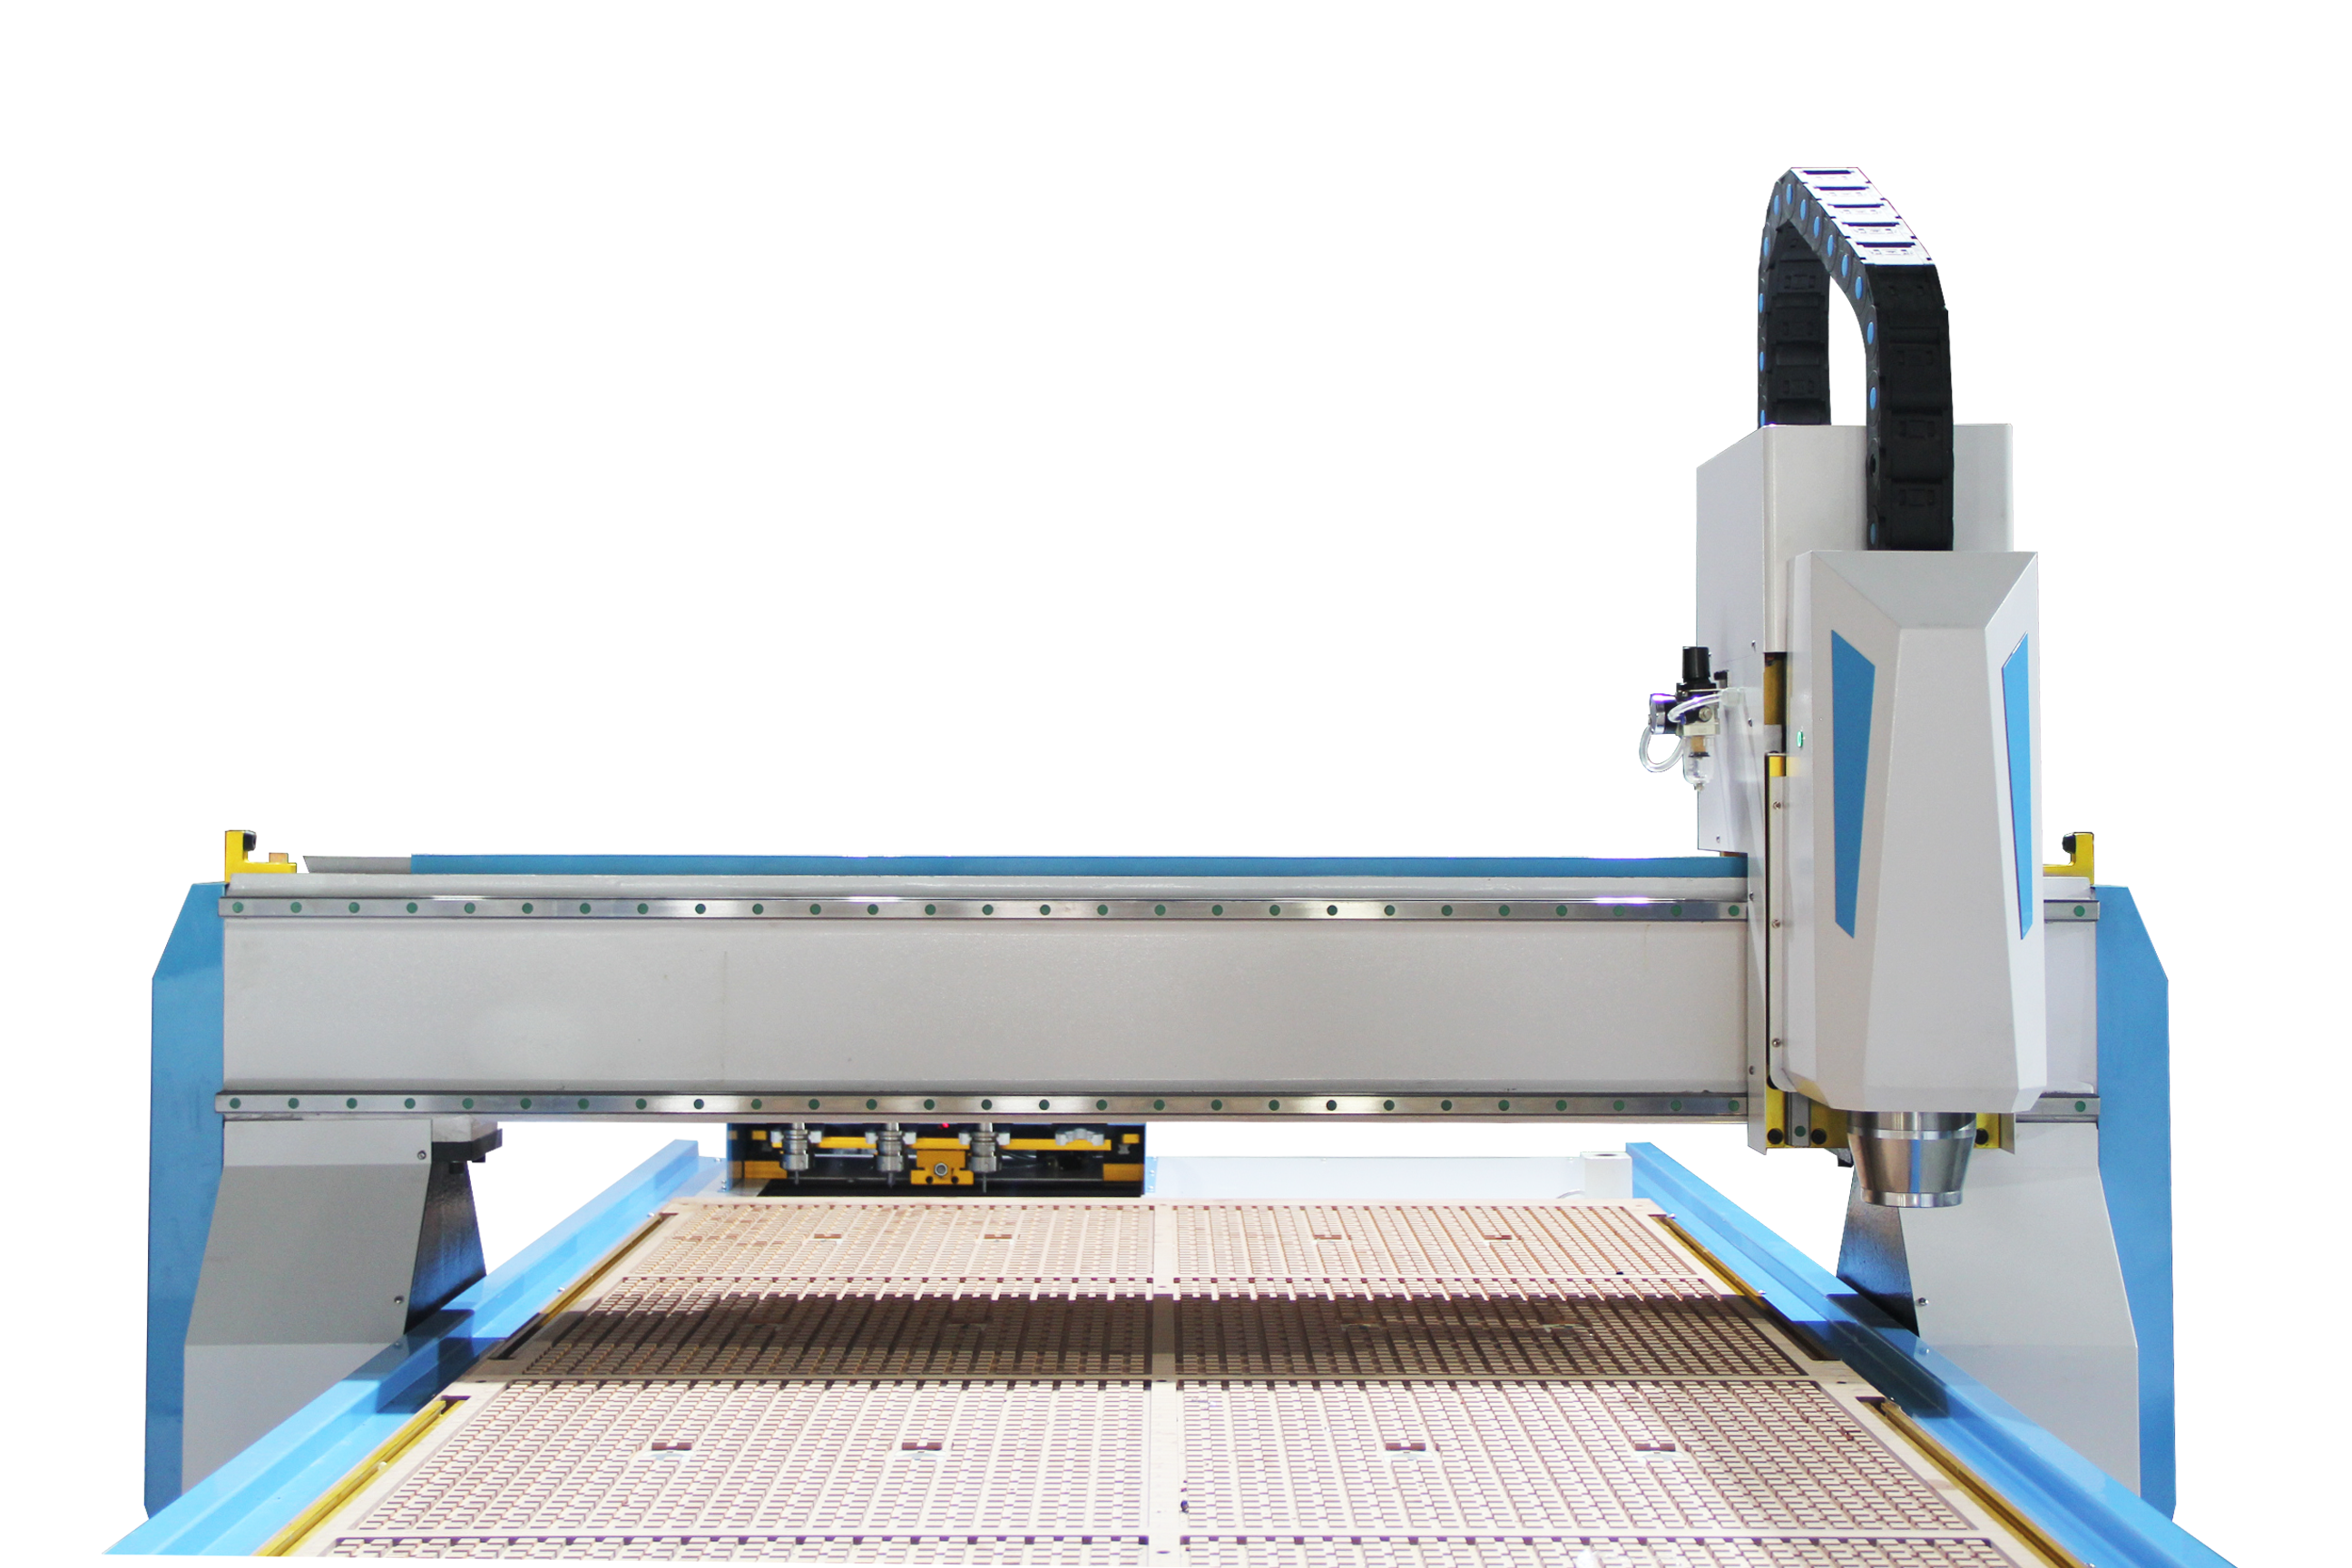 High Precision 1325 1530 ATC CNC Router Machine for Wood